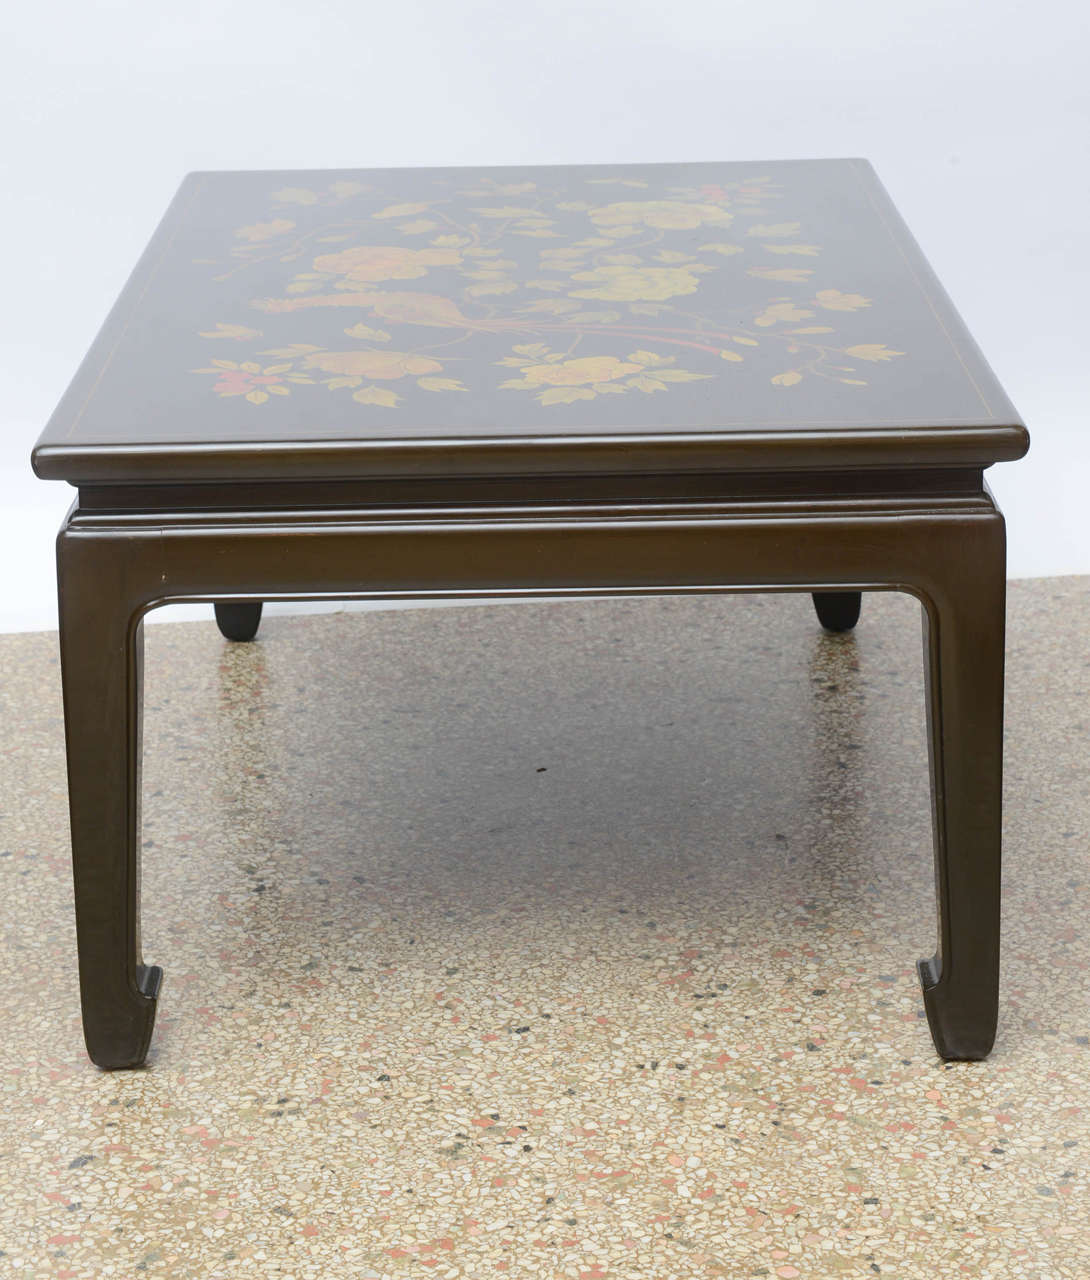 Birch Chinese Low Lacquered Table, Hand-Decorated, 20th Century